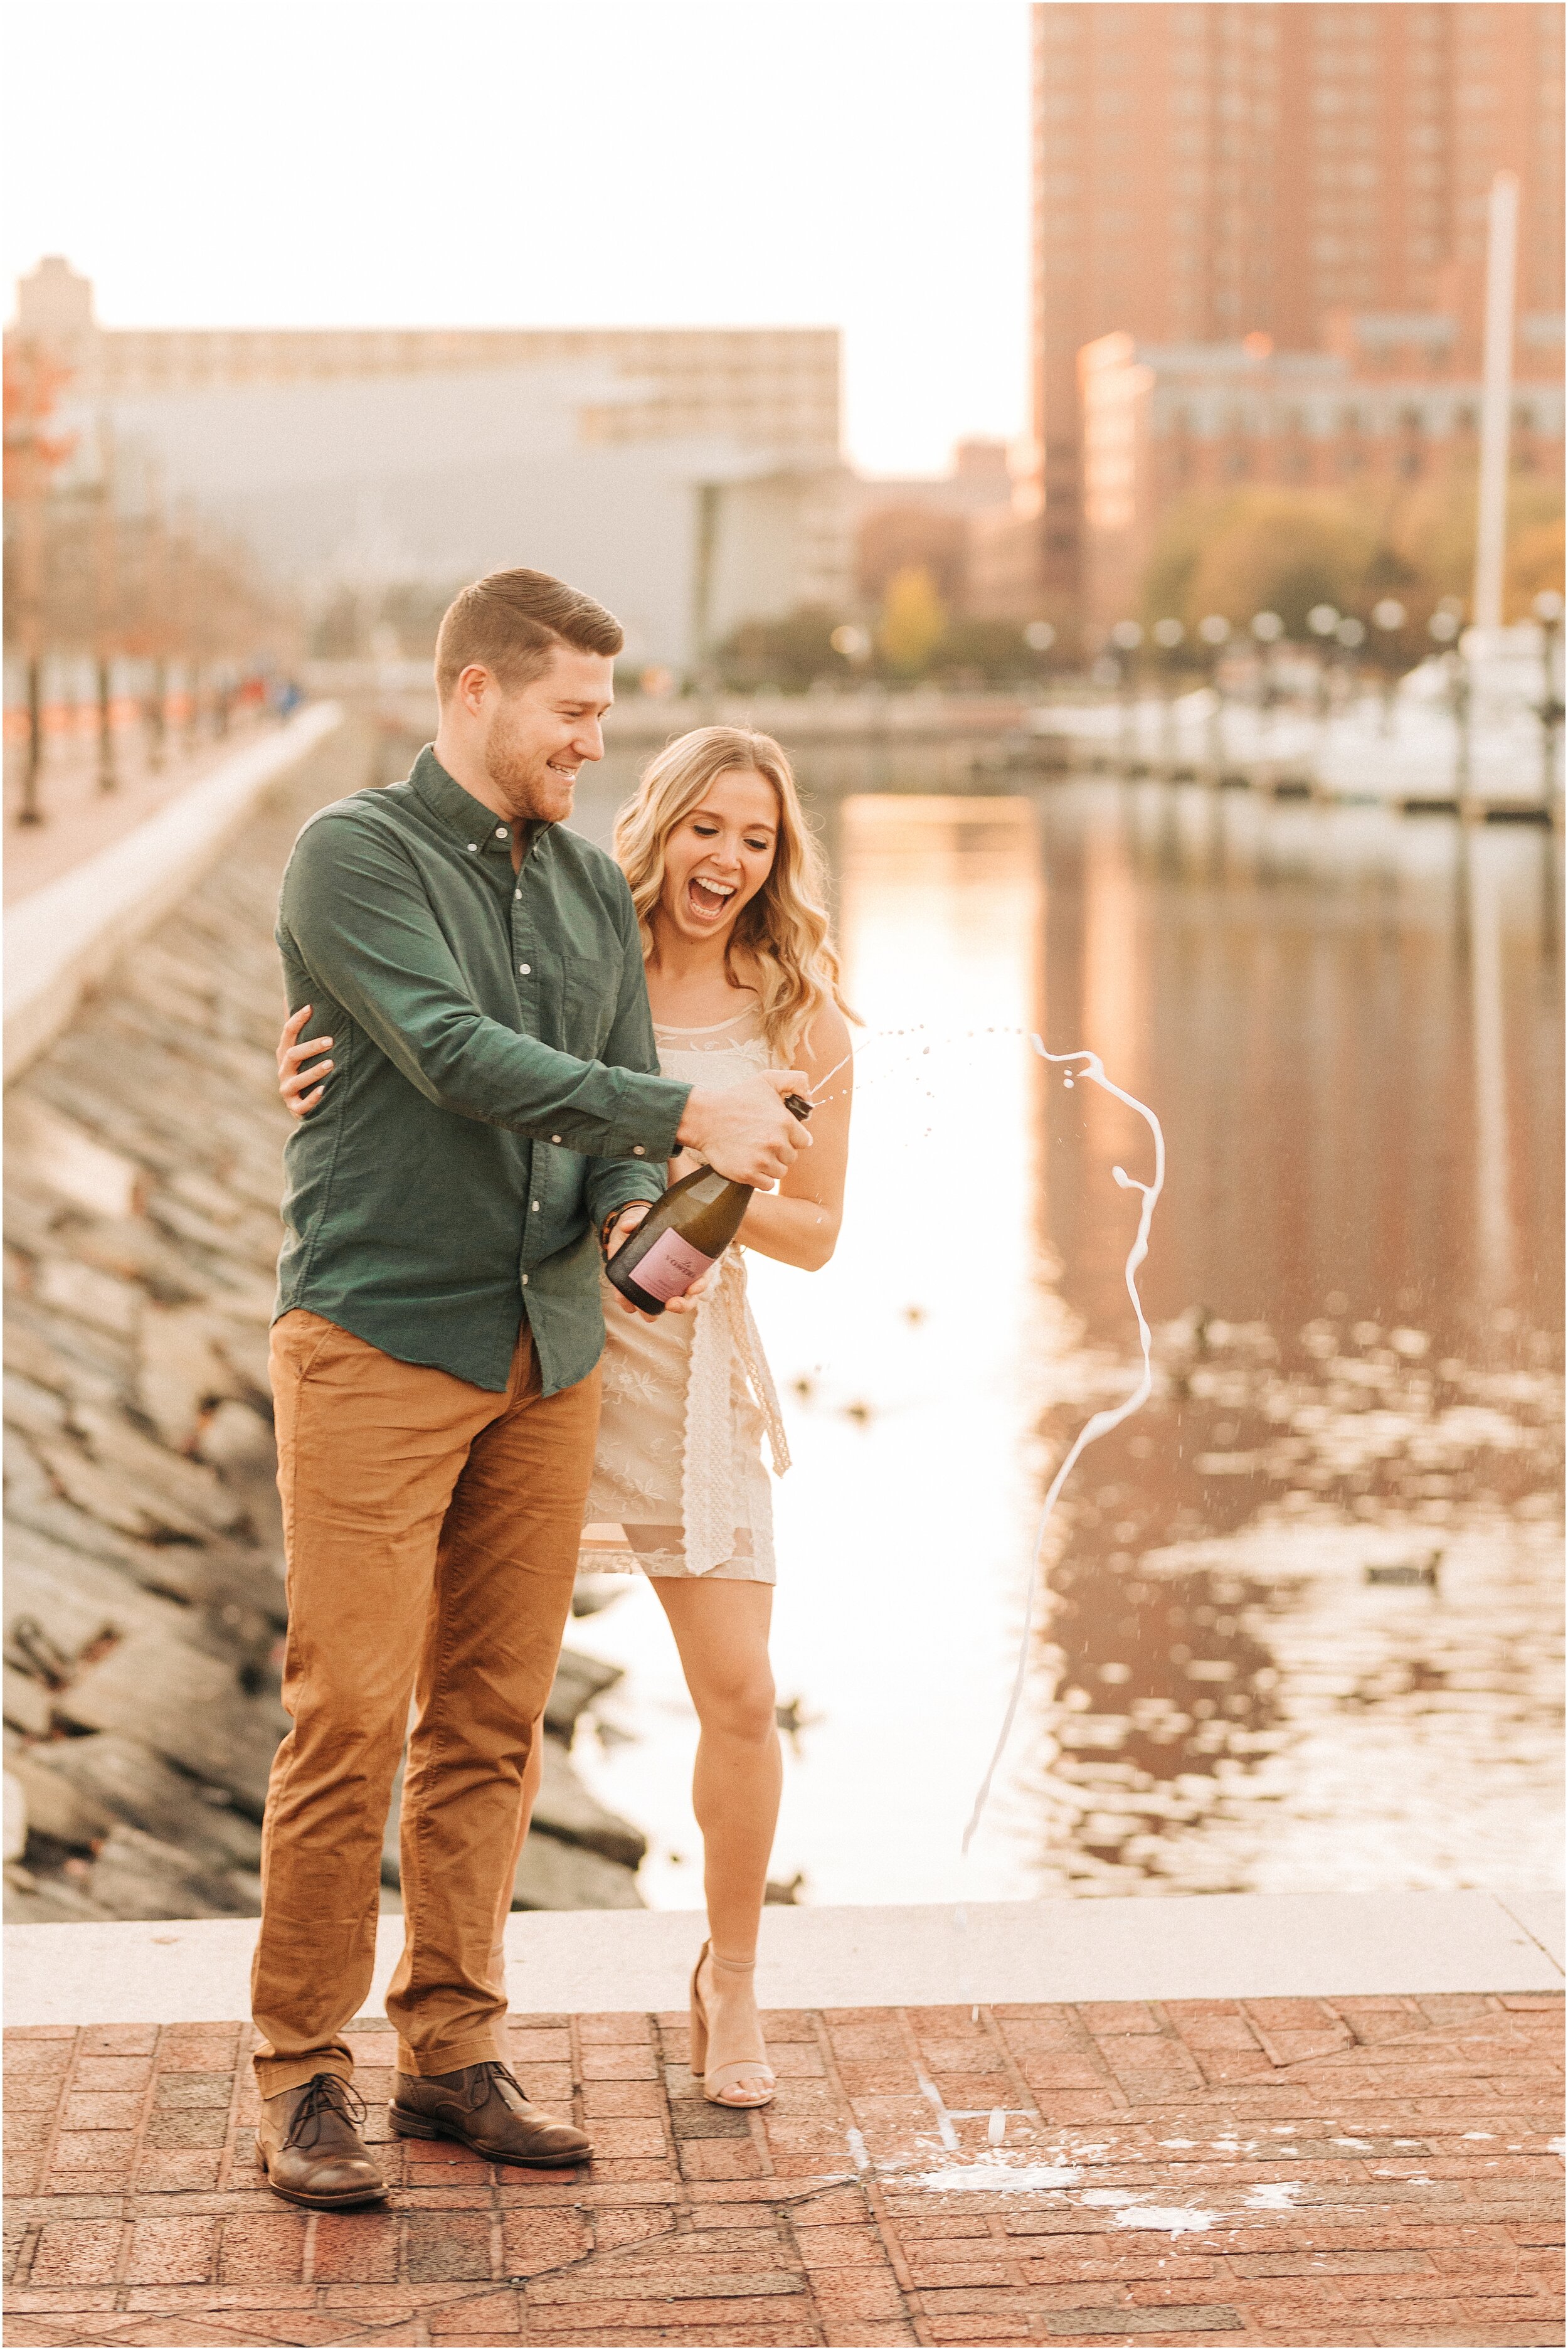 hannah leigh photography Baltimore City Maryland October Engagement Session_7069.jpg